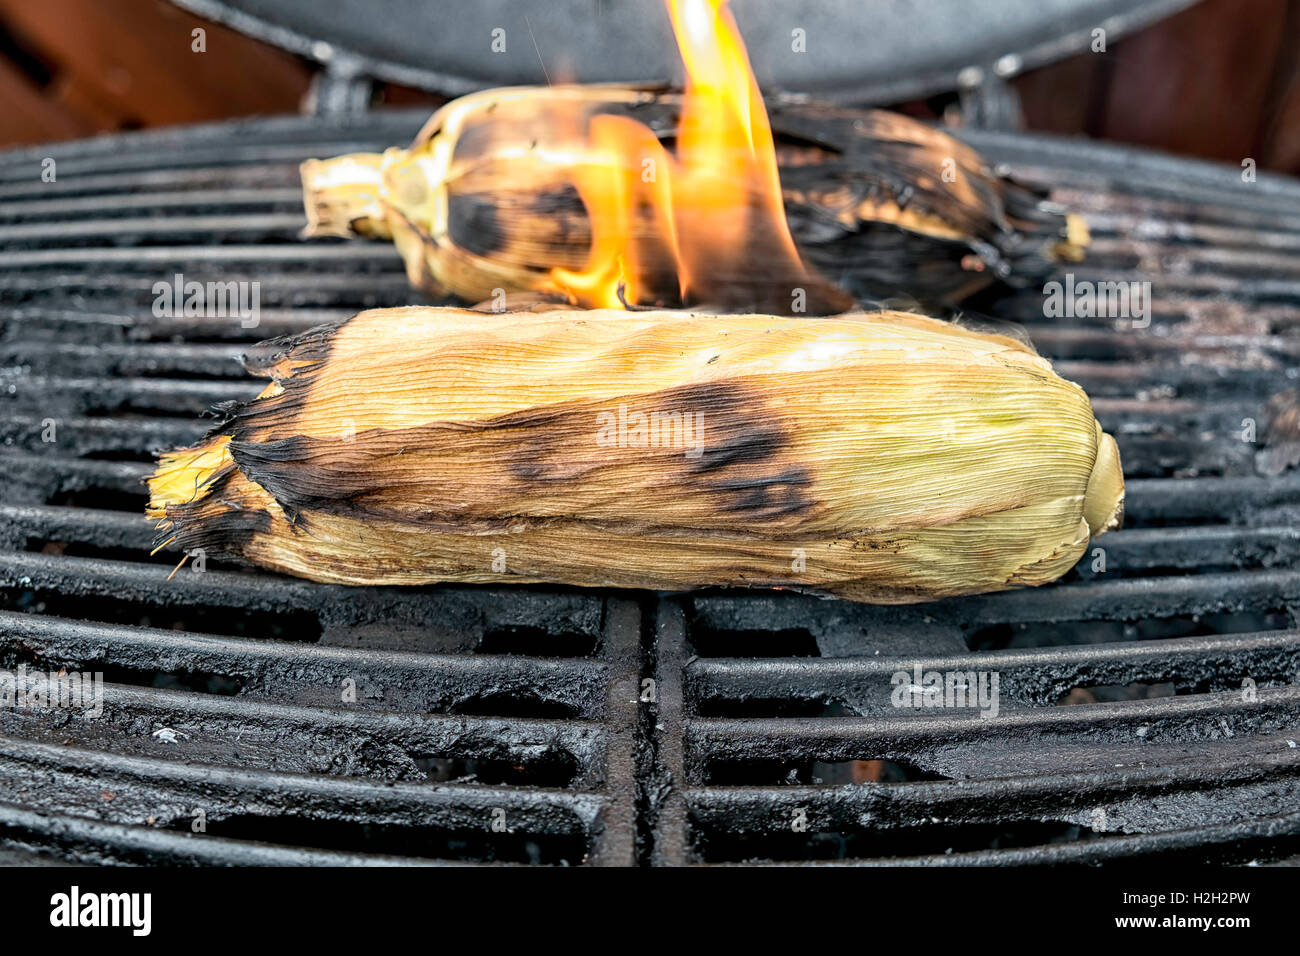 Corn cobs on the grill , flames coming of one of them. Stock Photo